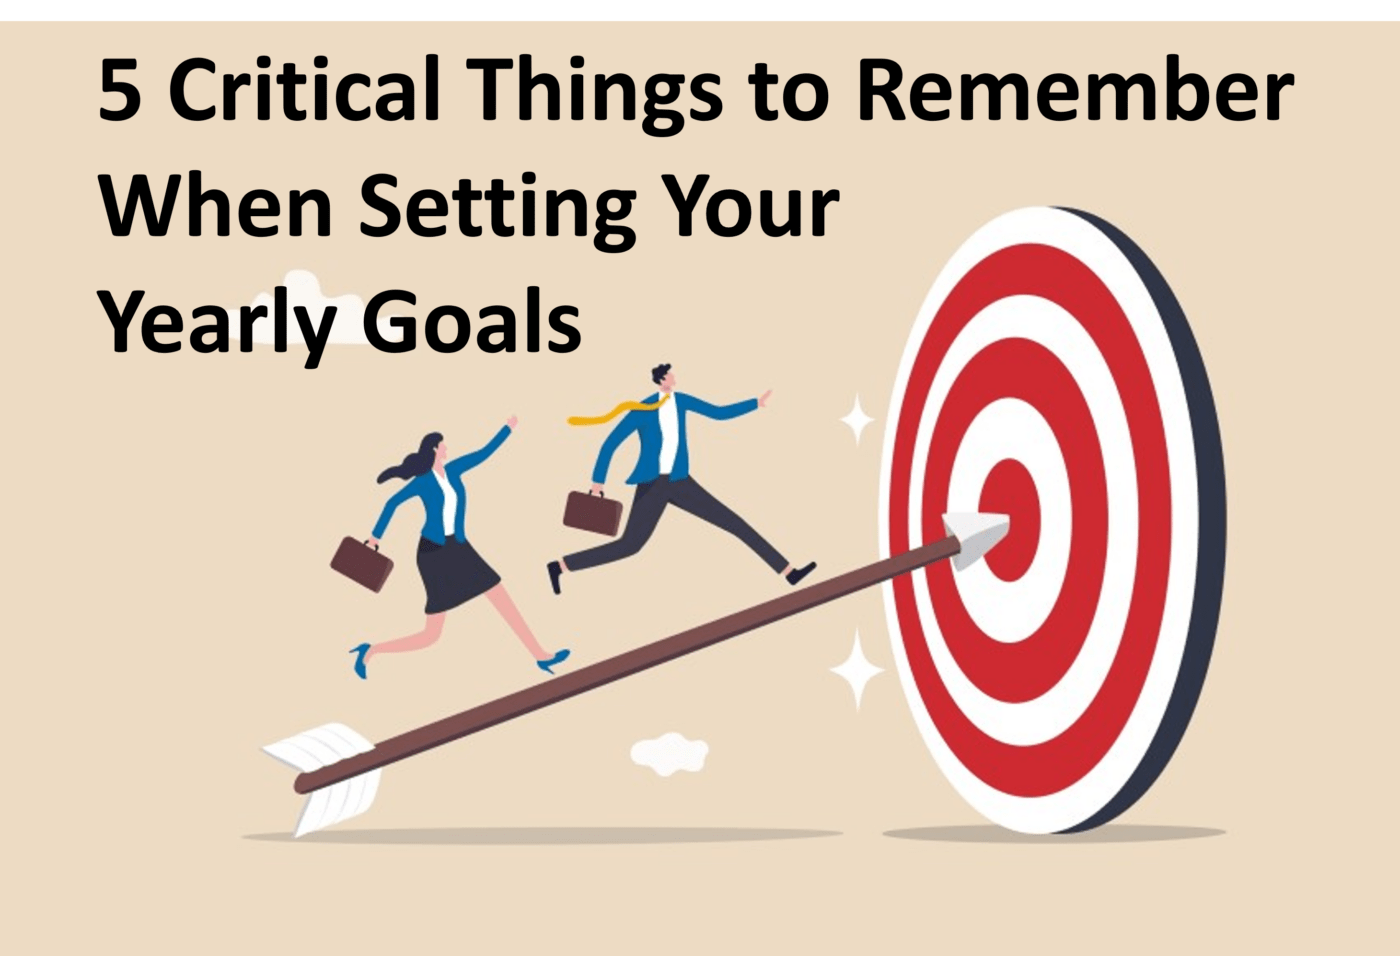 5 Critical Things to Remember When Setting Your Yearly Goals - image 5-critical-things-goal-setting-1400x956 on http://cavemaninasuit.com